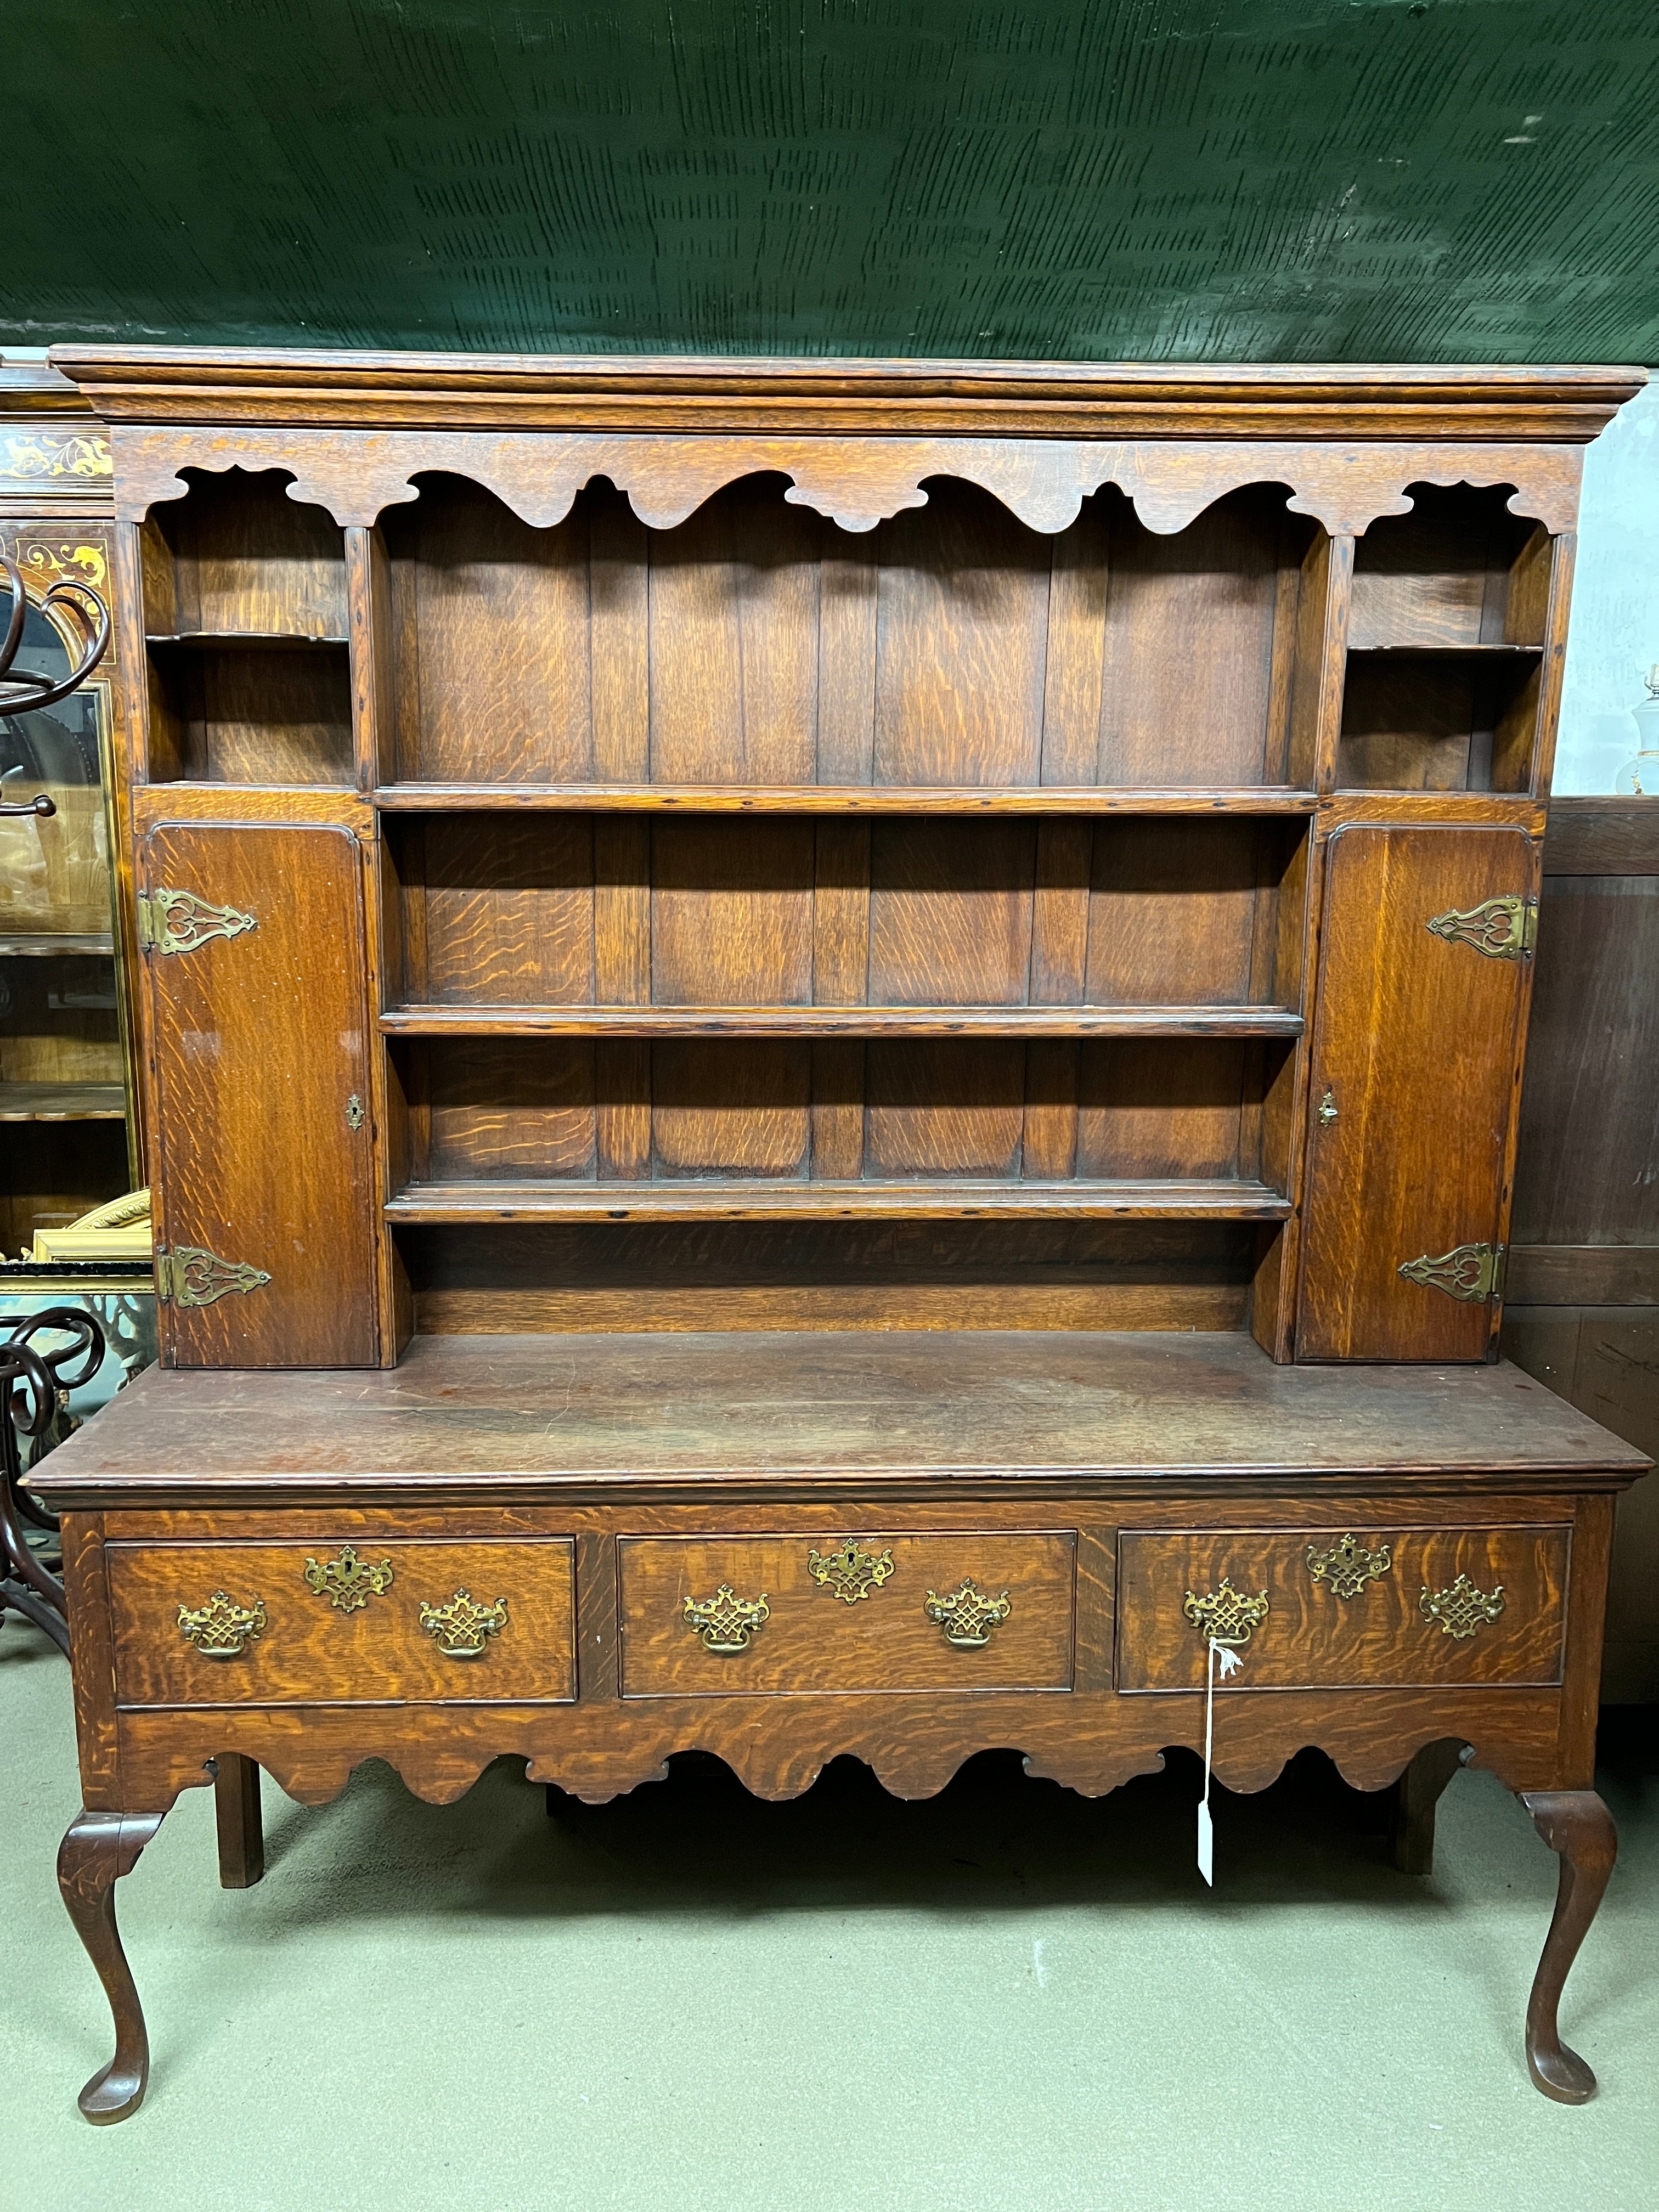 This 18th-century Queen Anne-style oak dresser and rack is an impressive rustic and functional piece of furniture that can bring a touch of family history and domestic warmth to any home. 
This type of furniture was typical of the British